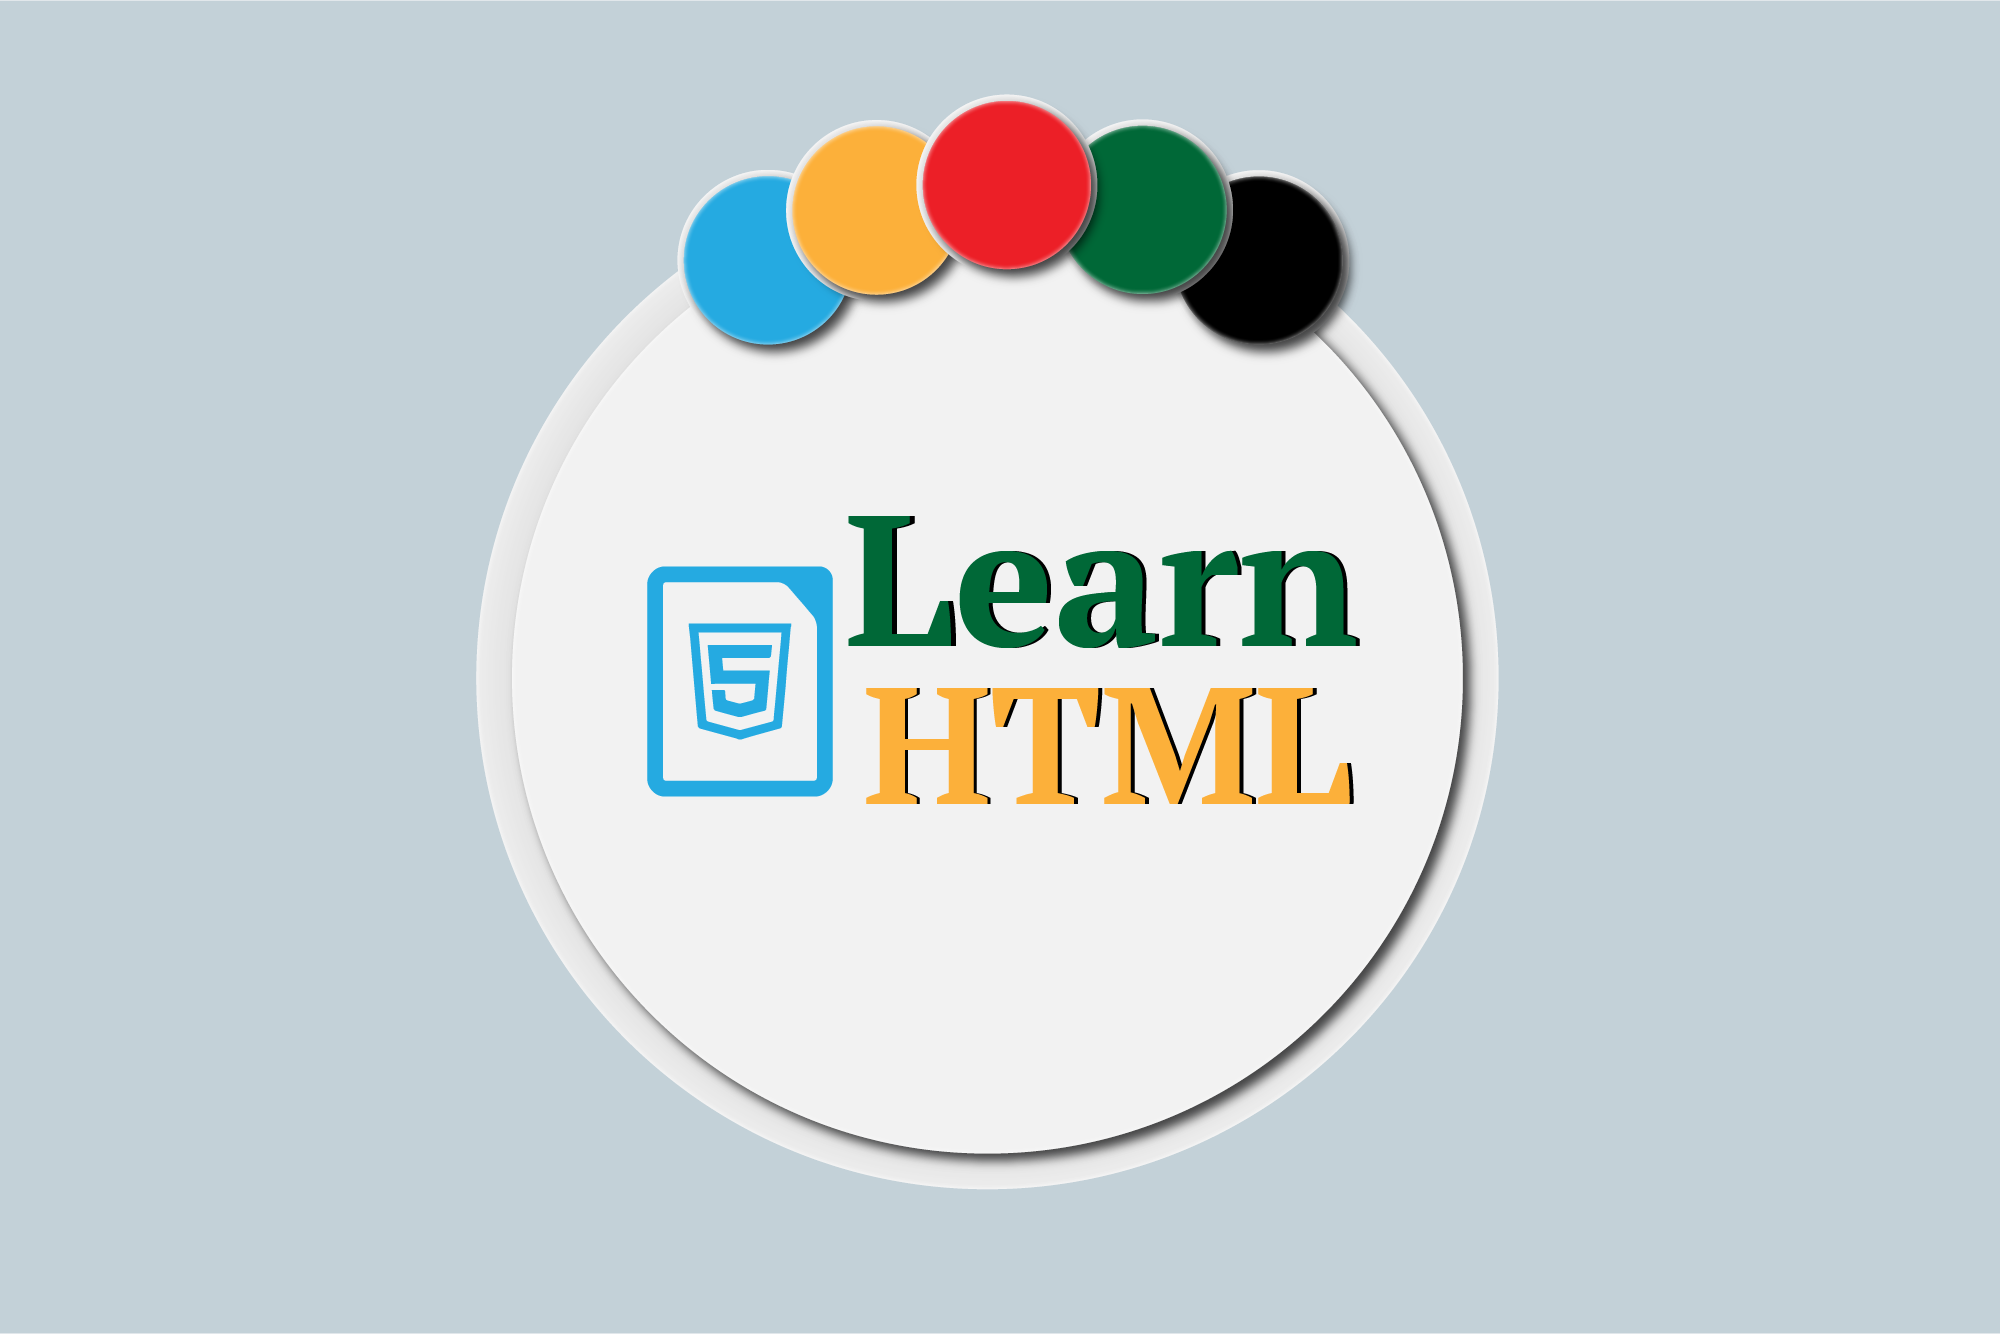 Let's Learn HTML